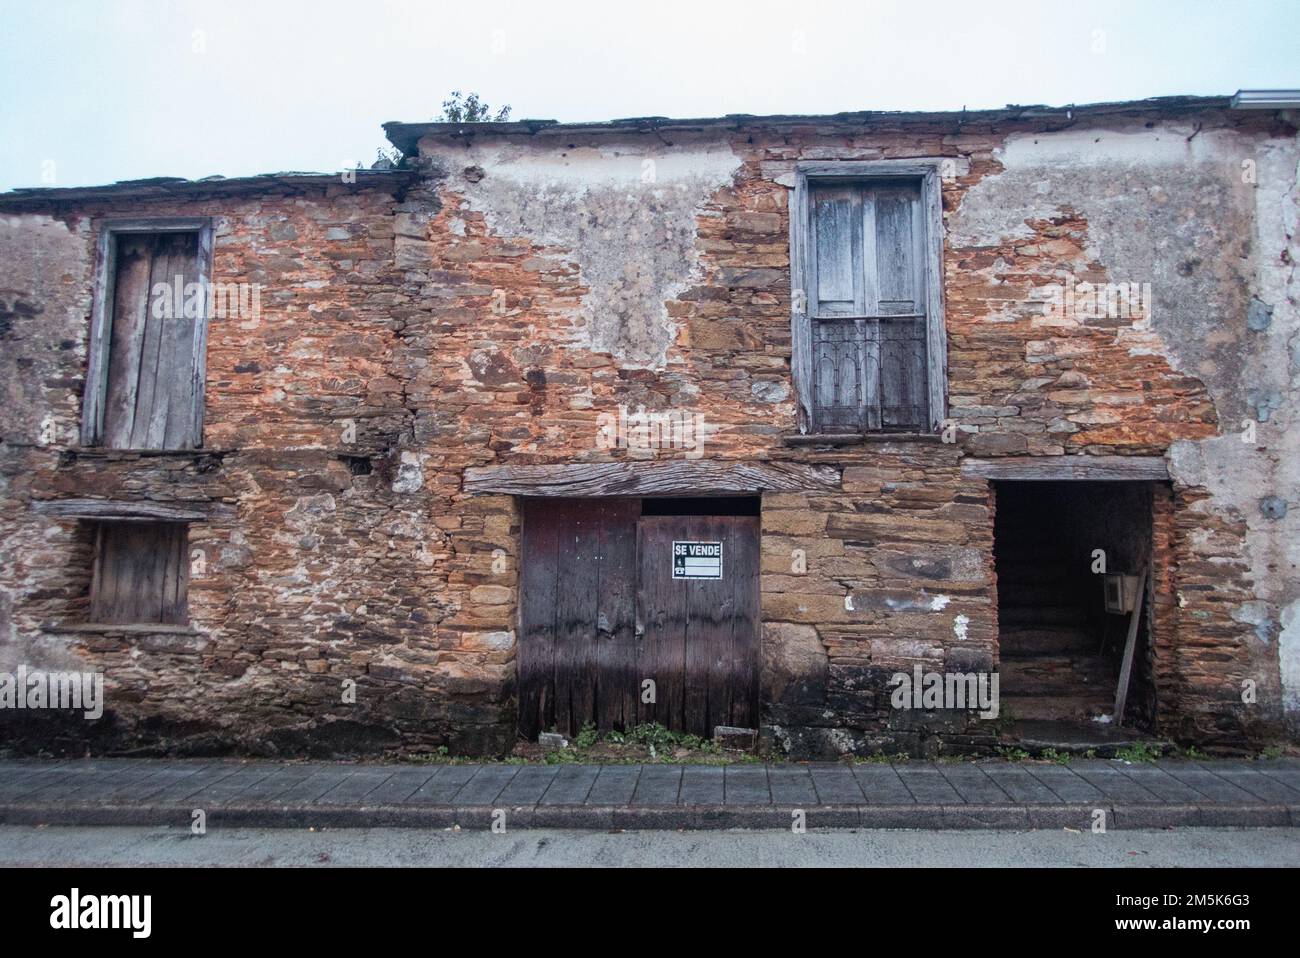 A ruin on sale. A derelict old farmhouse in the village Tricastela on the Saint James Way to Santiago de Compostela with a real estate agent's sign. Stock Photo